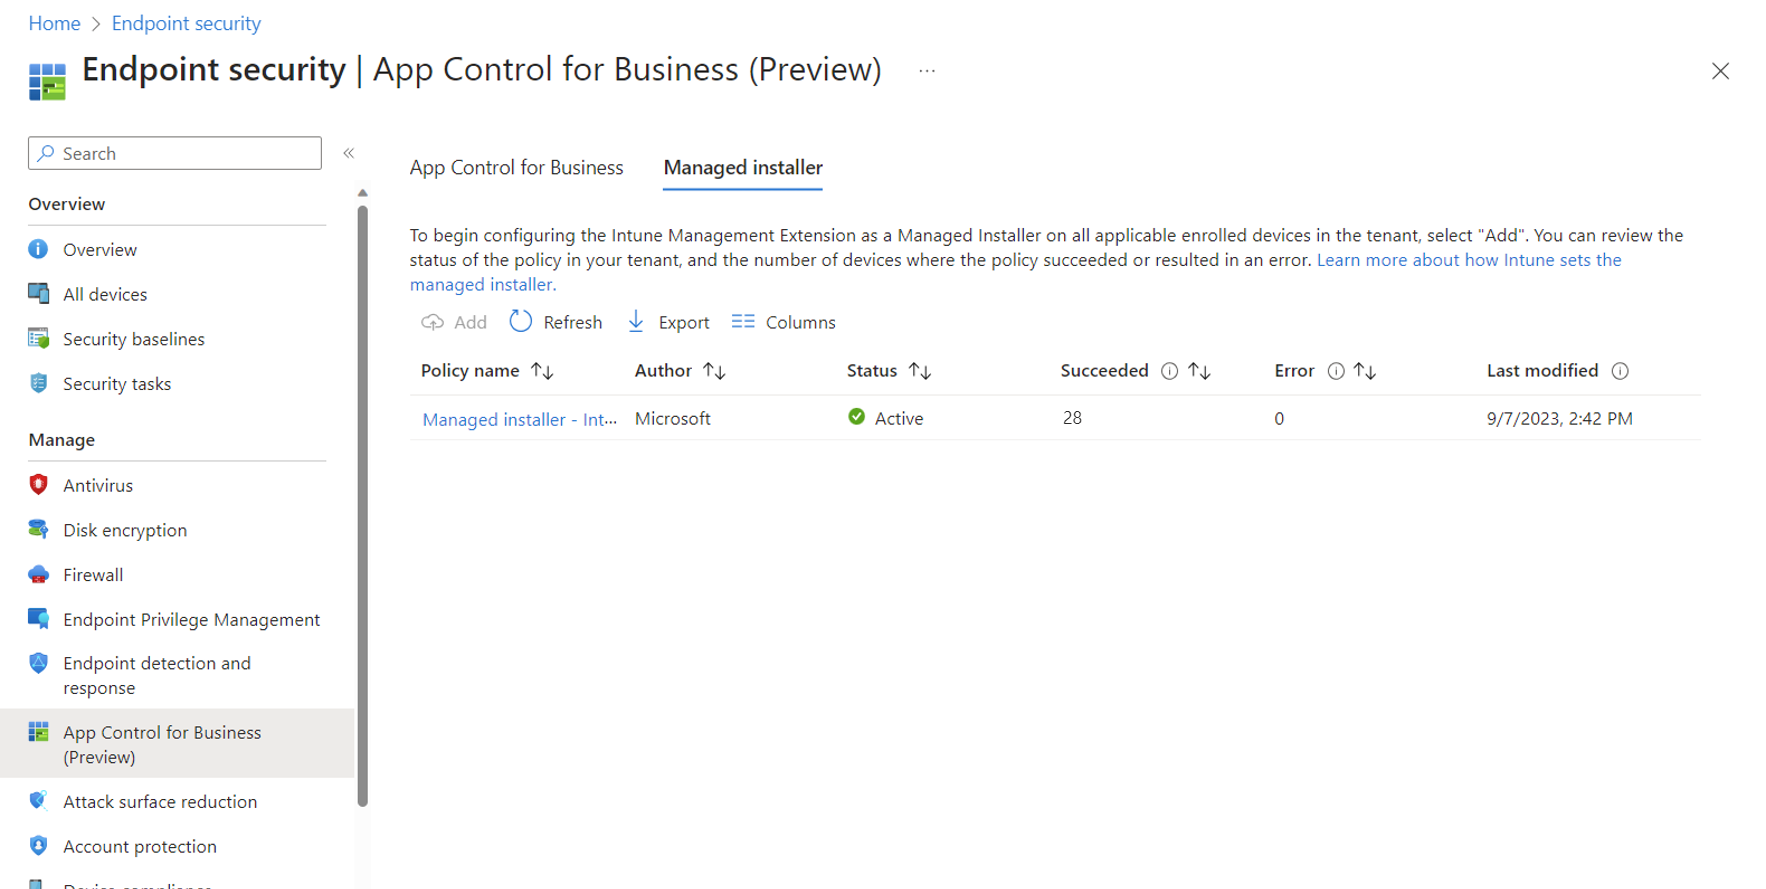 This screen capture shows a view of the managed installer policy Overview page.